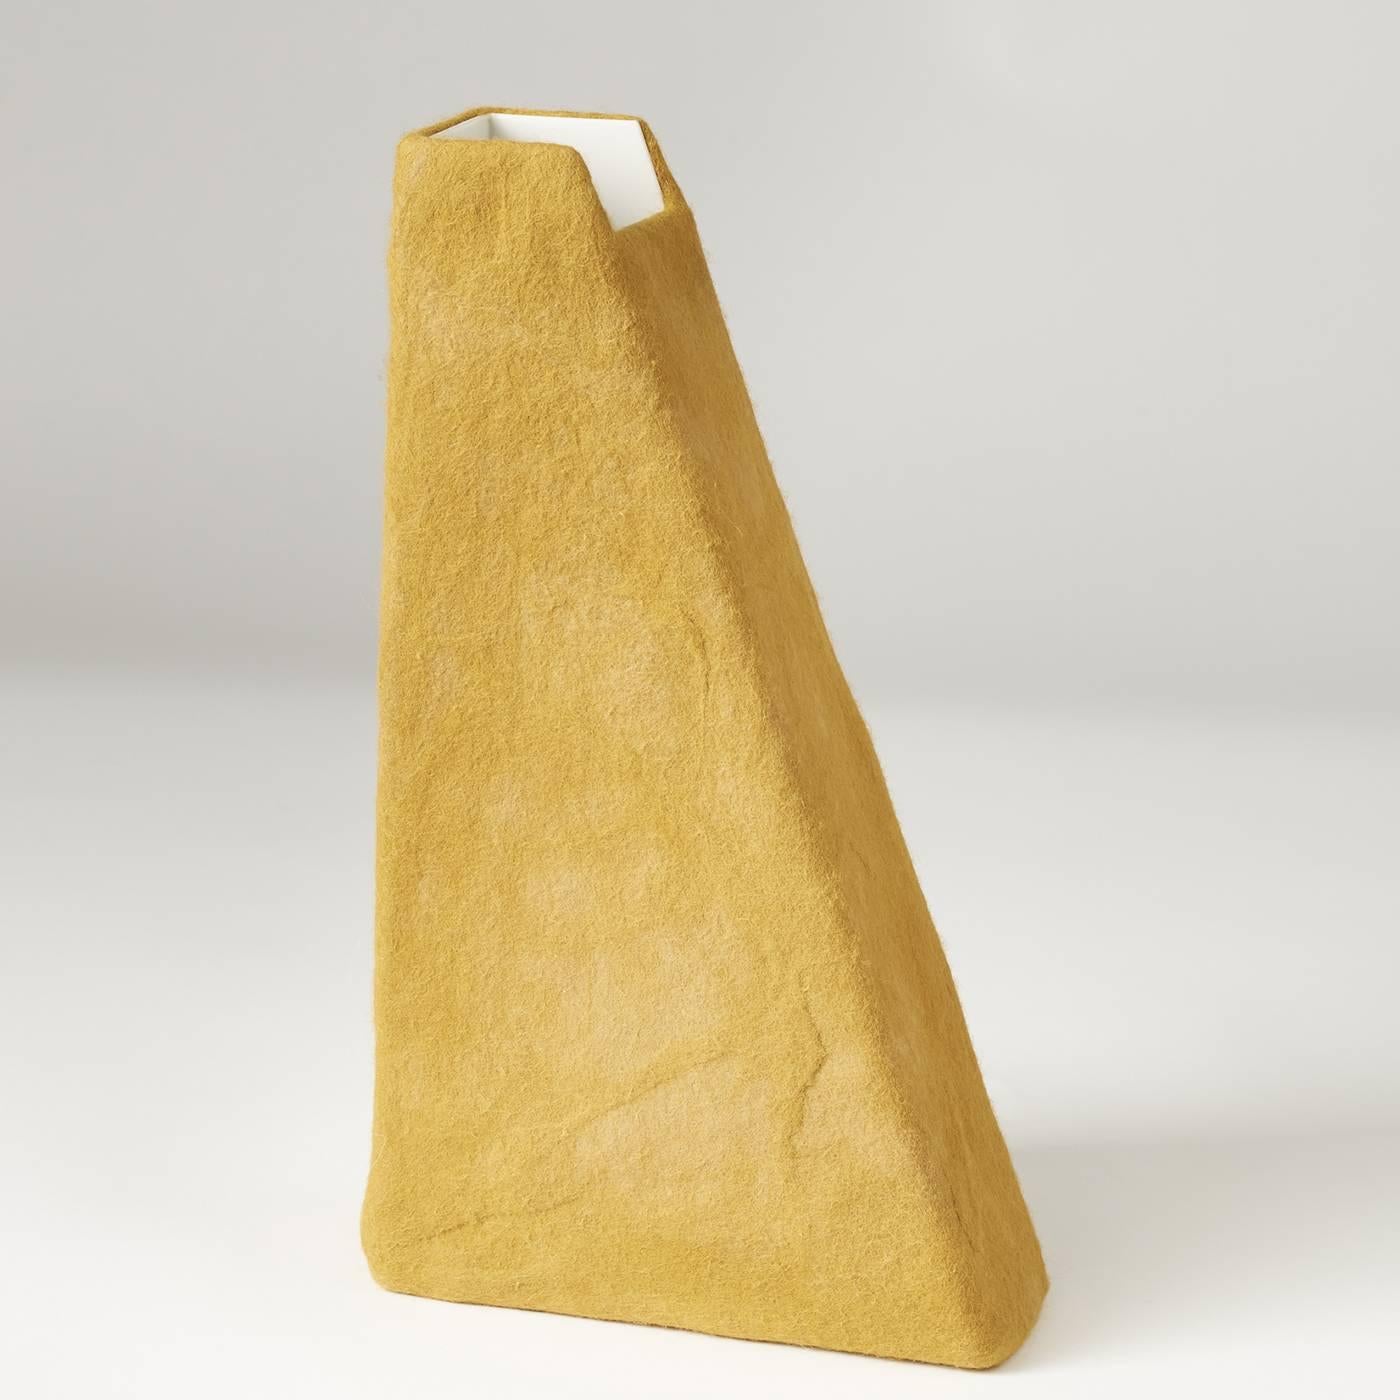 Handmade in Umbria, an unconventional selection of materials come together to form this unique vase. The bold, triangular silhouette, crafted out of stainless steel, tapers to a delicate geometric mouth. The white interior contrasts with the bright